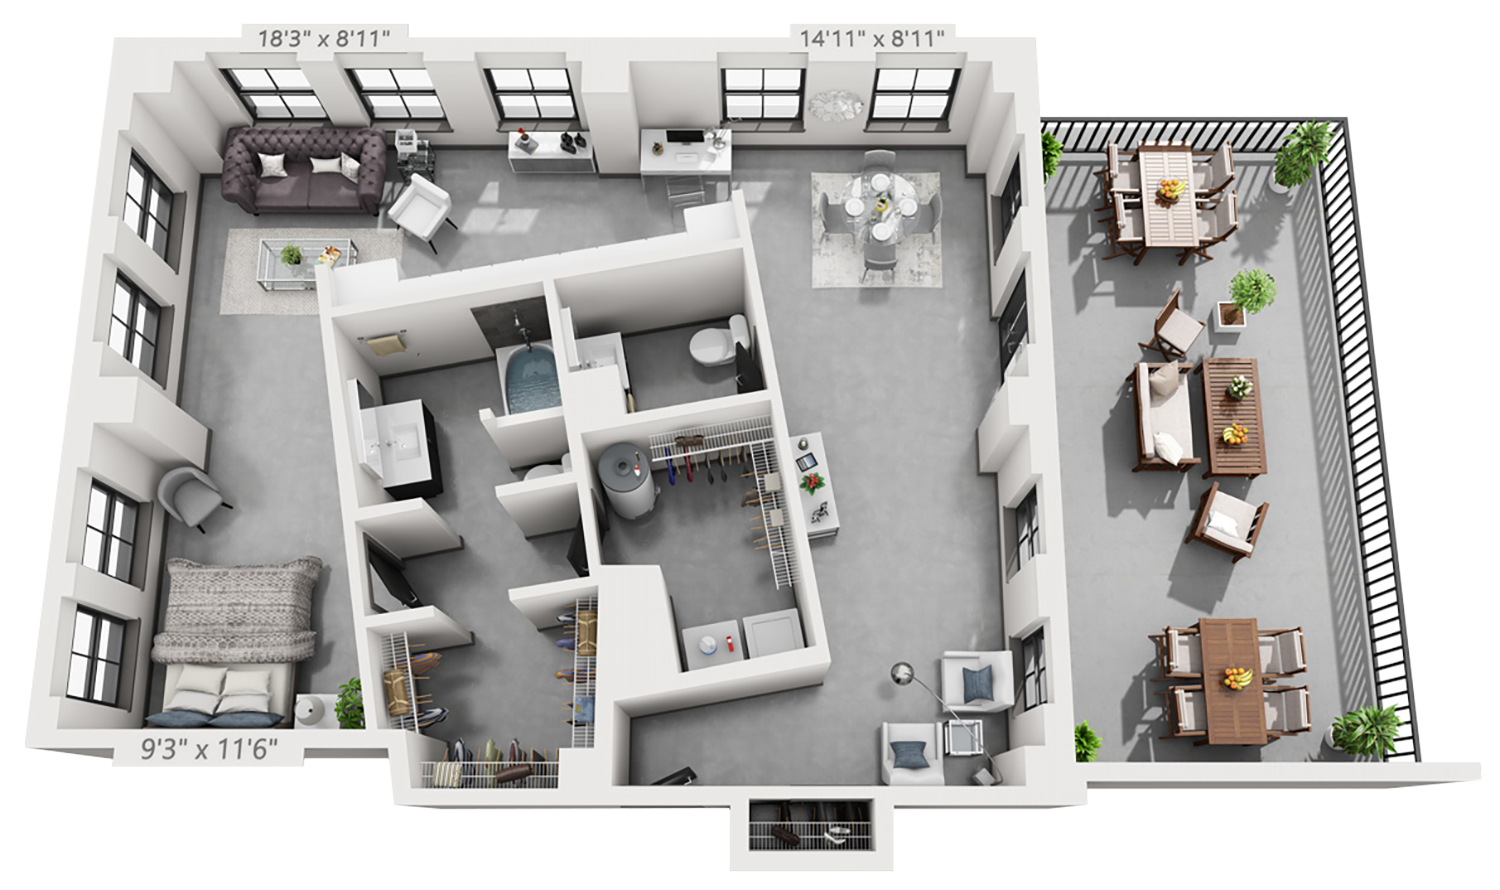 PH-A1 plan is 1 bed, 1.5 bath and 1,353 square feet